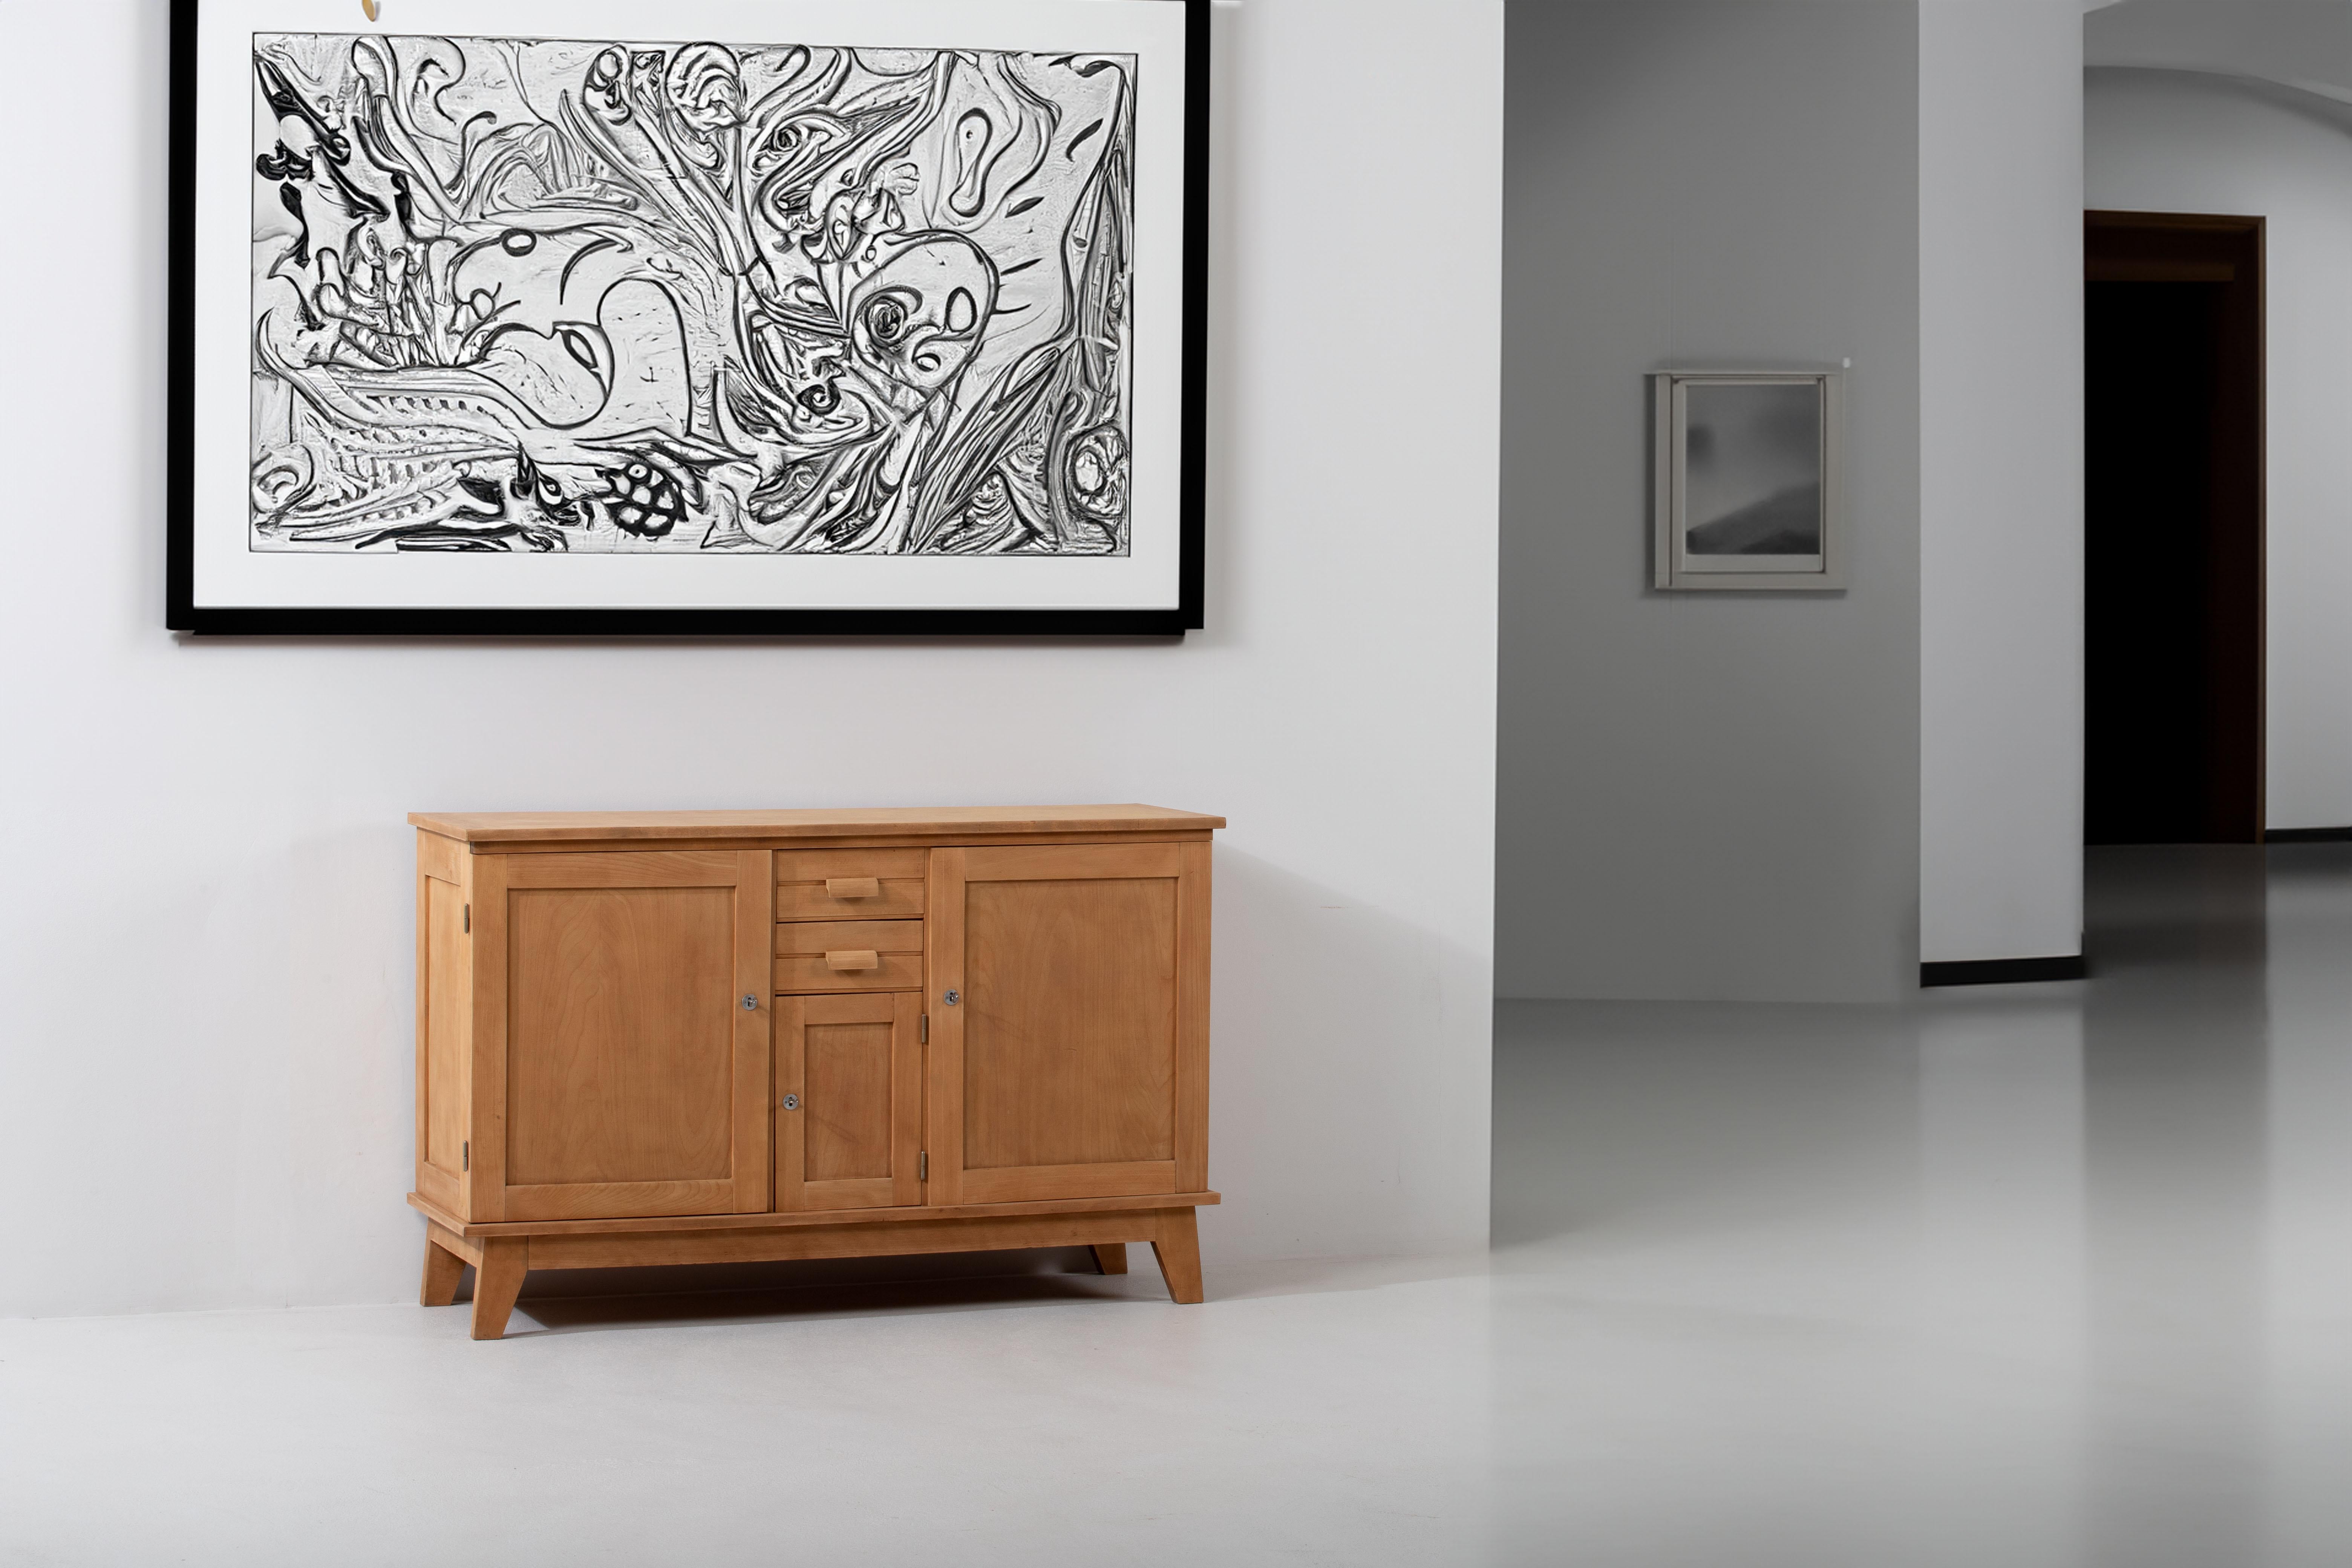 Introducing an extraordinary oak sideboard attributed to the renowned designer René Gabriel. 
This exceptional piece showcases Gabriel's signature style and attention to detail while his presenting the French Reconstruction buffet, meticulously